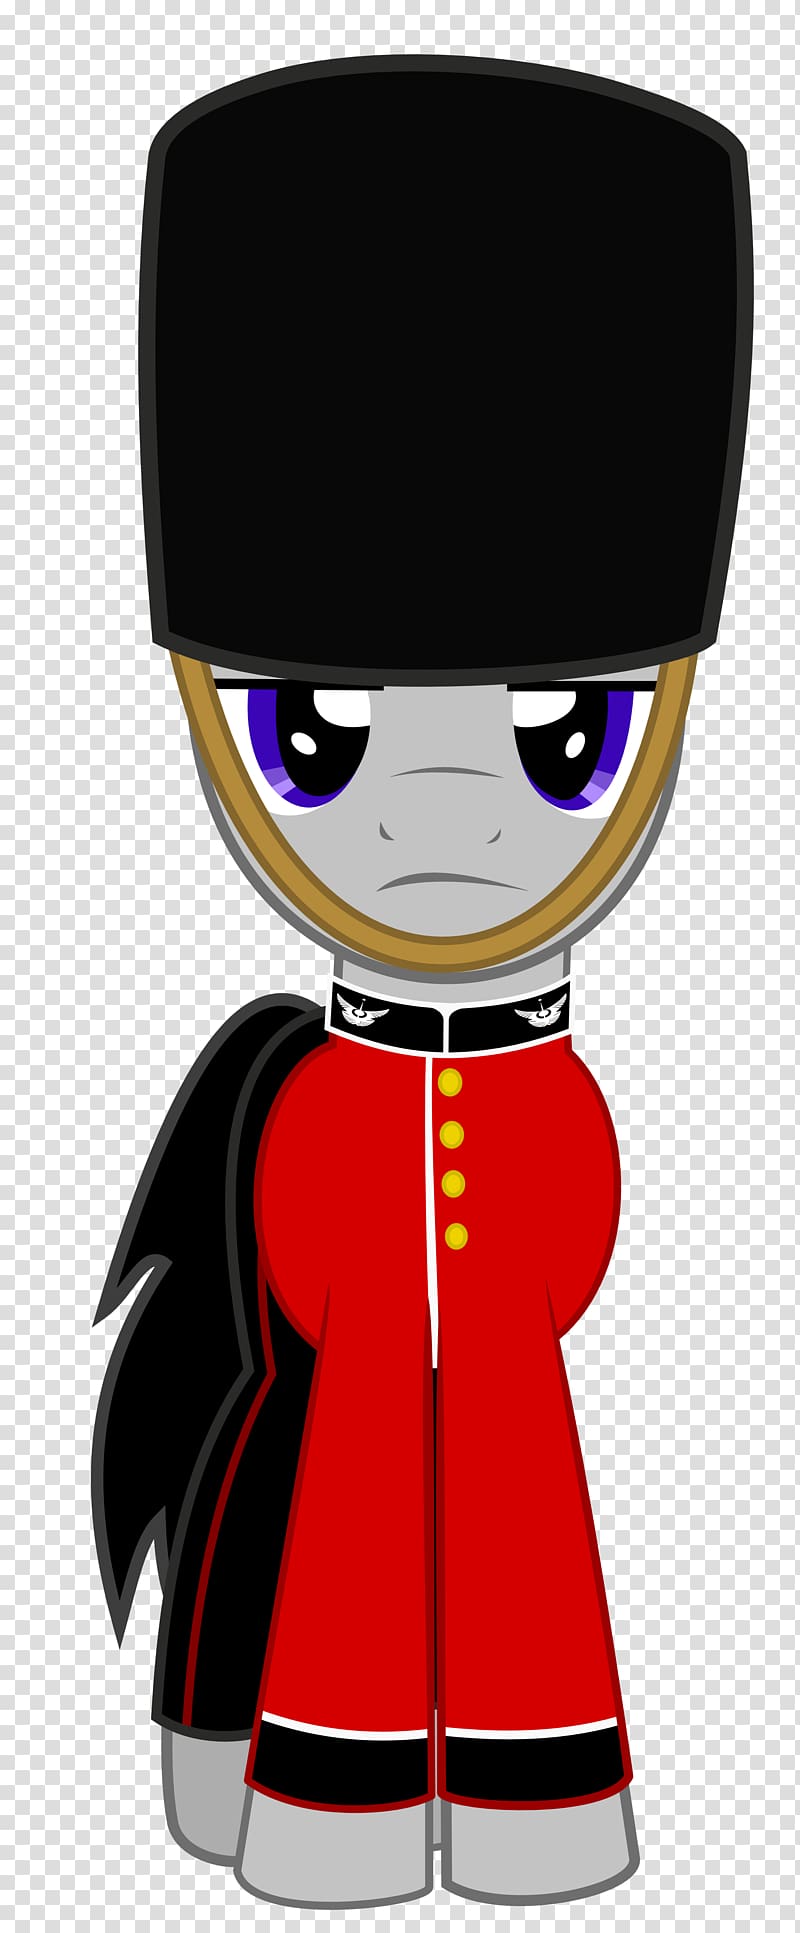 Product design Illustration Character, london guard transparent background PNG clipart